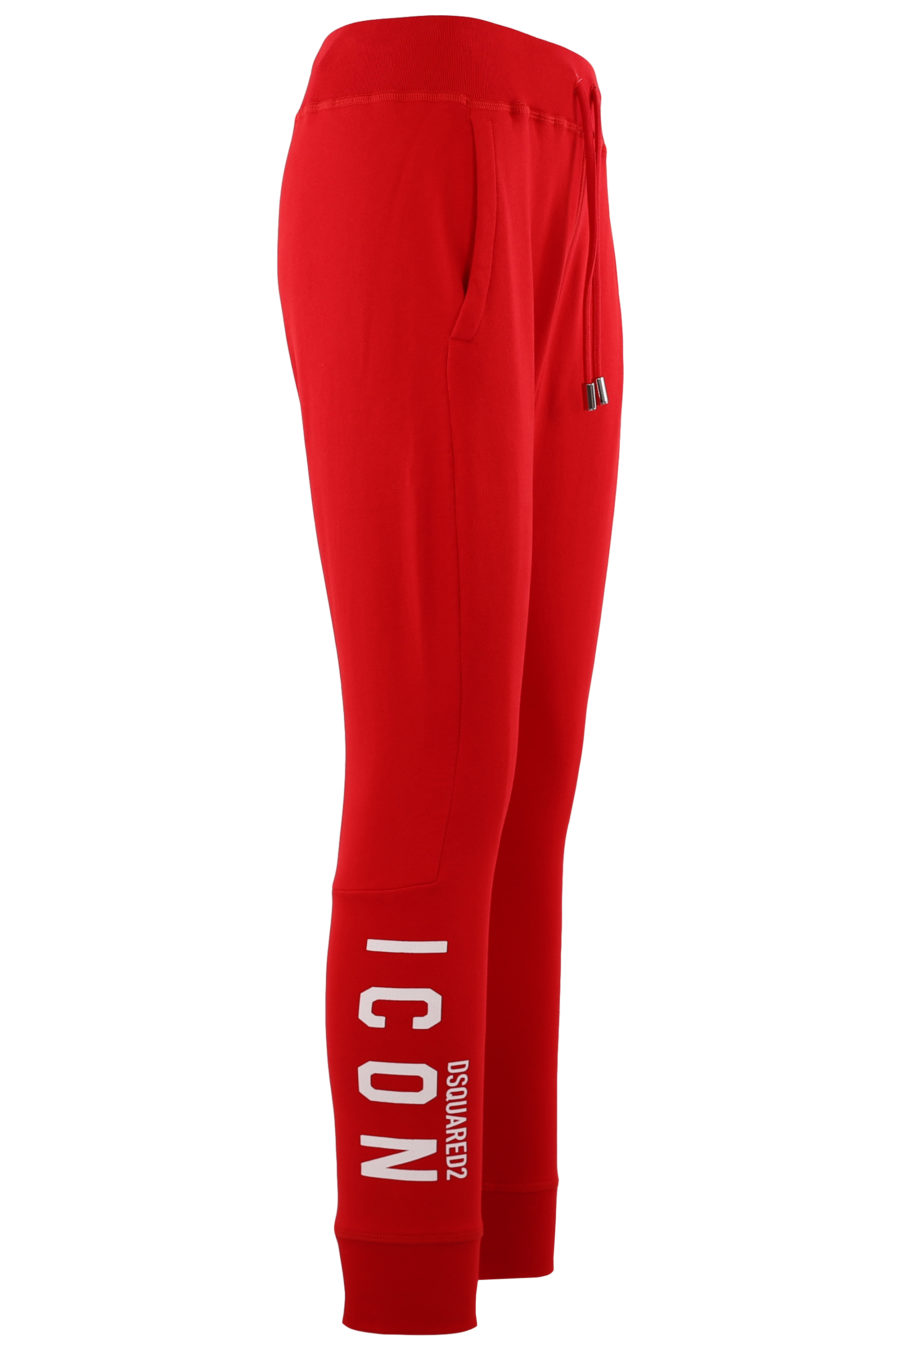 Tracksuit bottoms red with white logo "Icon" - 5beb896ca876a4804a938743690c93c79a8df47b